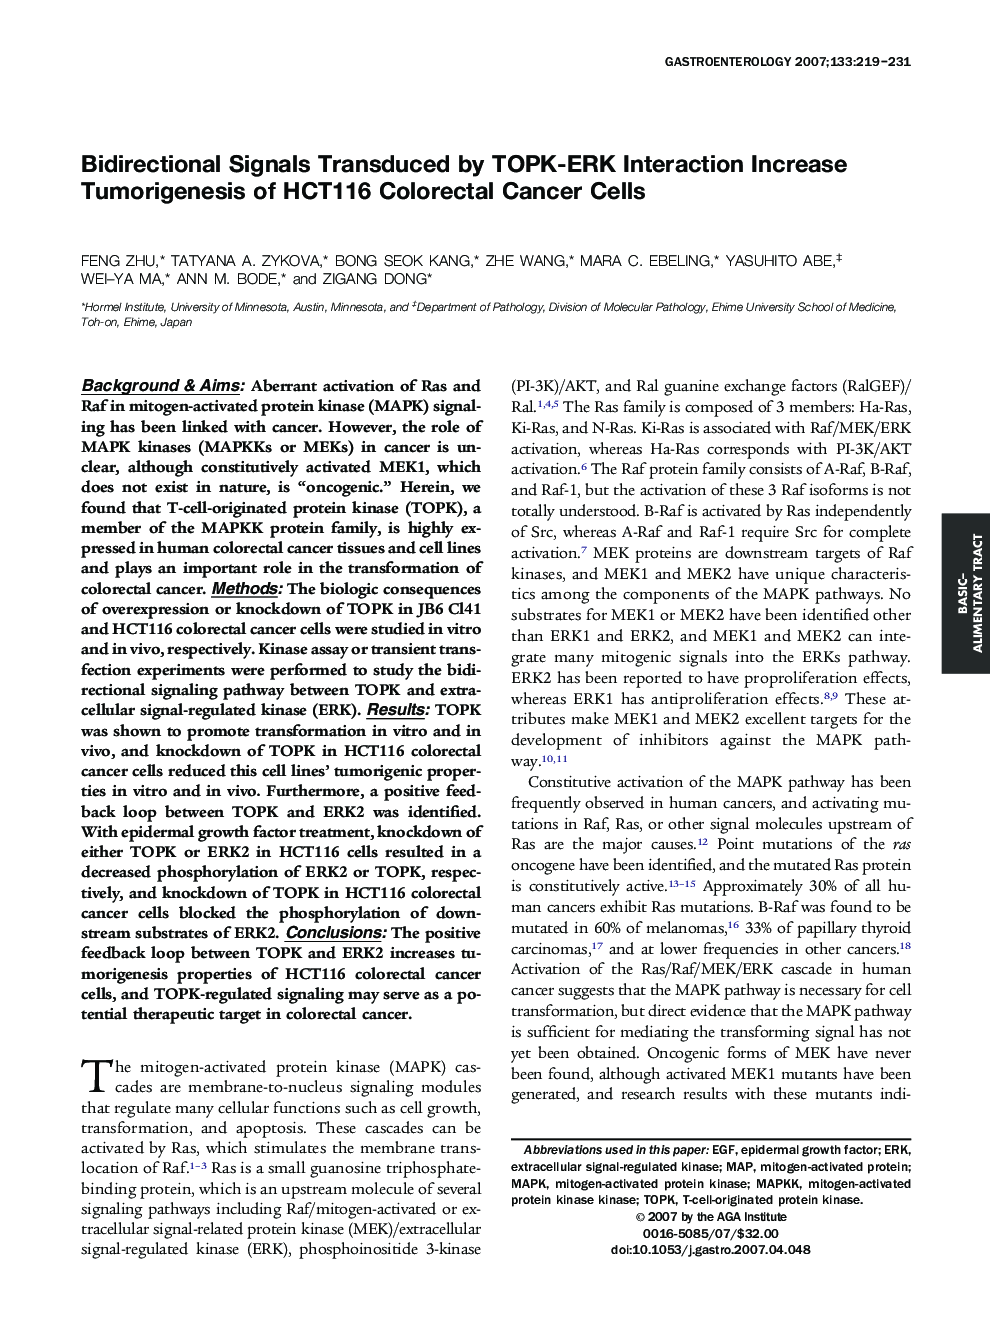 Bidirectional Signals Transduced by TOPK-ERK Interaction Increase Tumorigenesis of HCT116 Colorectal Cancer Cells 